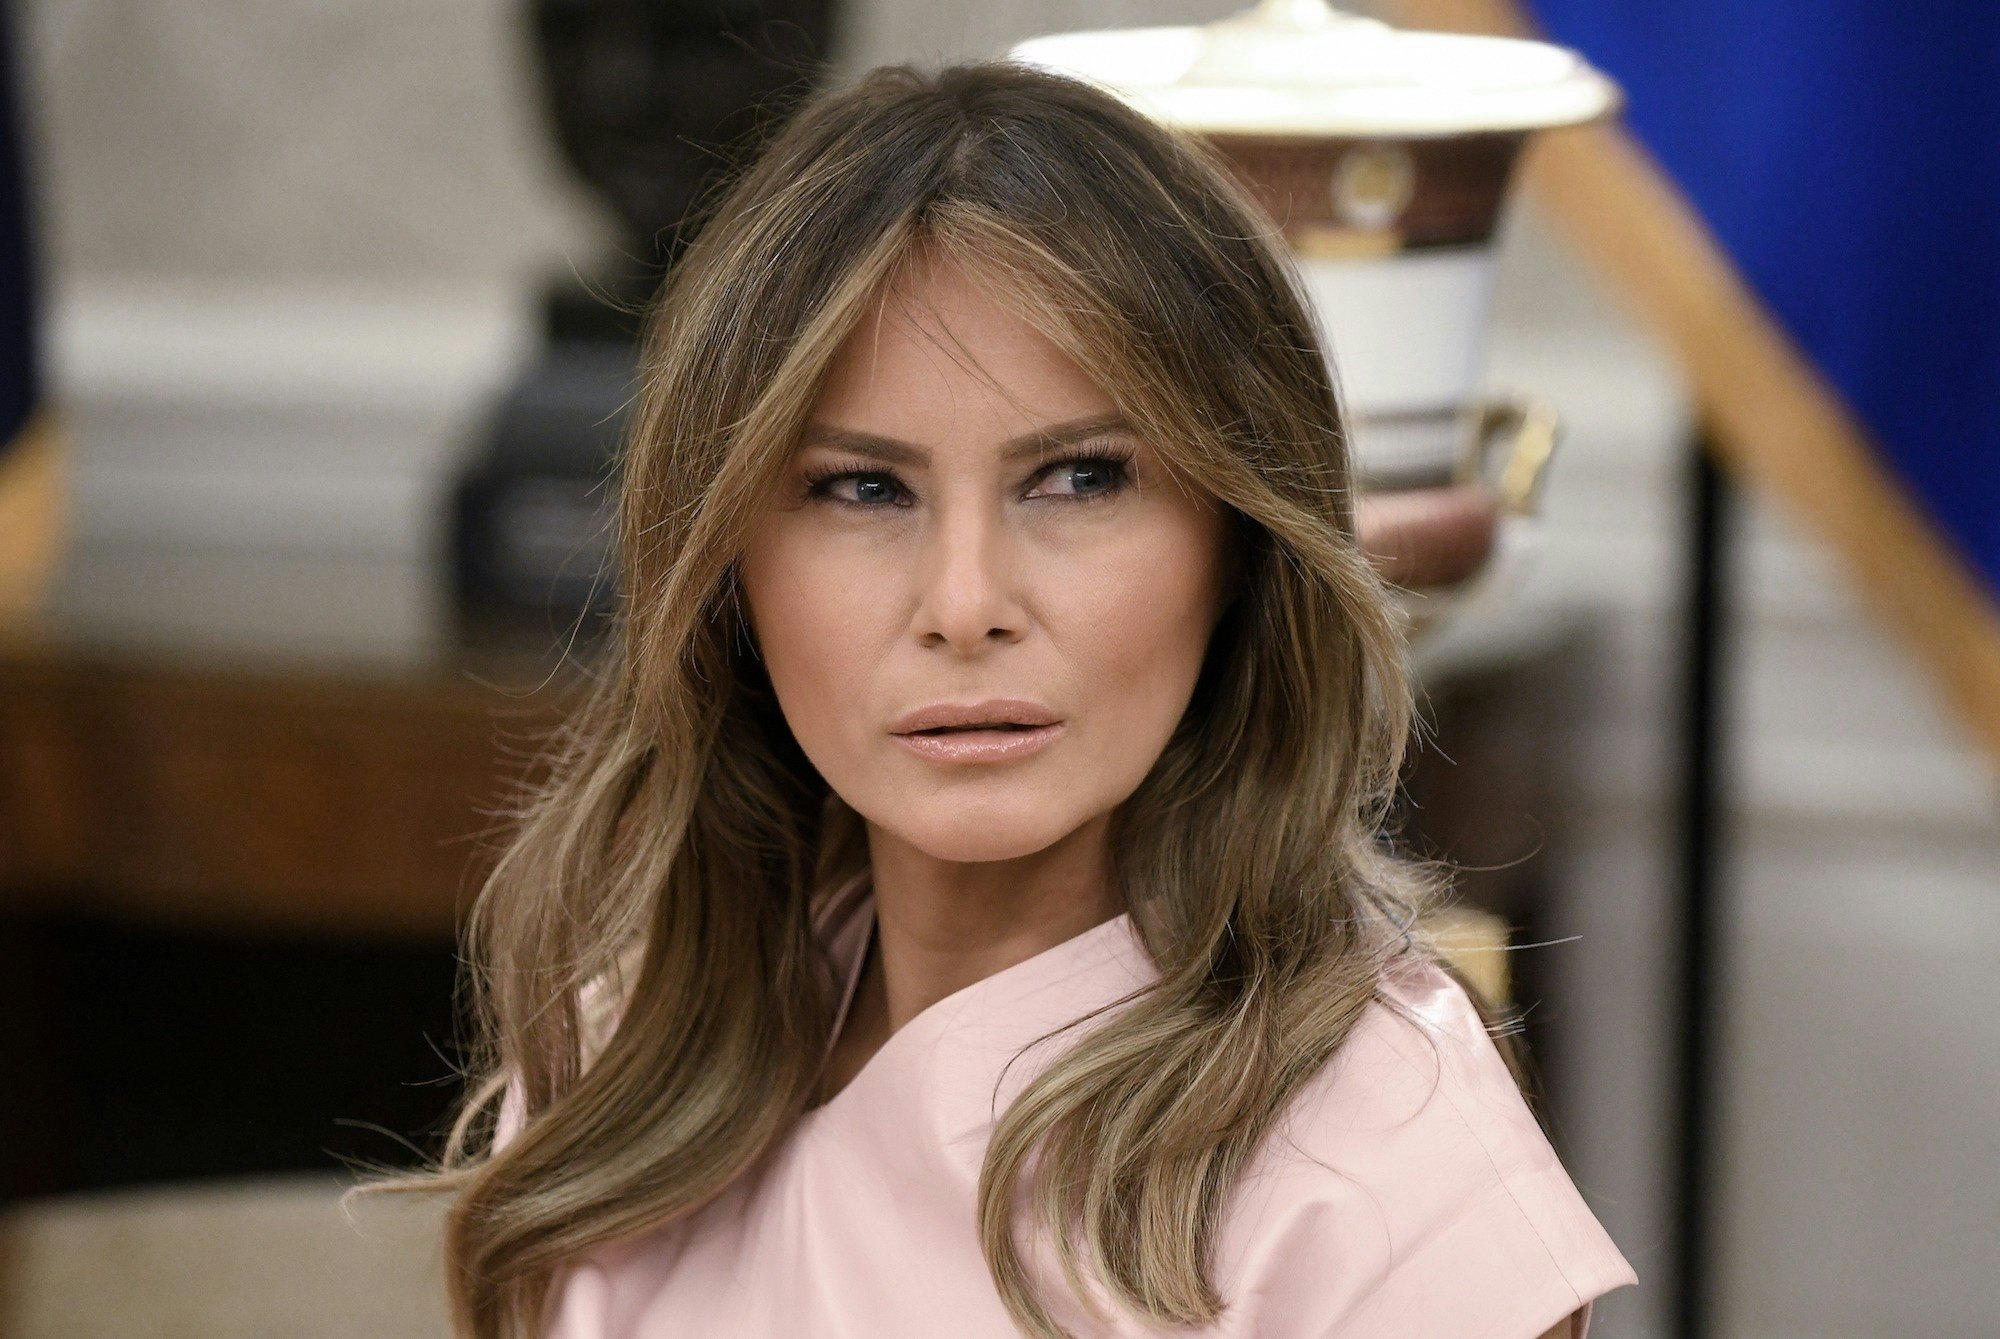 Melania Trump Wore Tan Leather Pants That Matched Her Skin Tone a